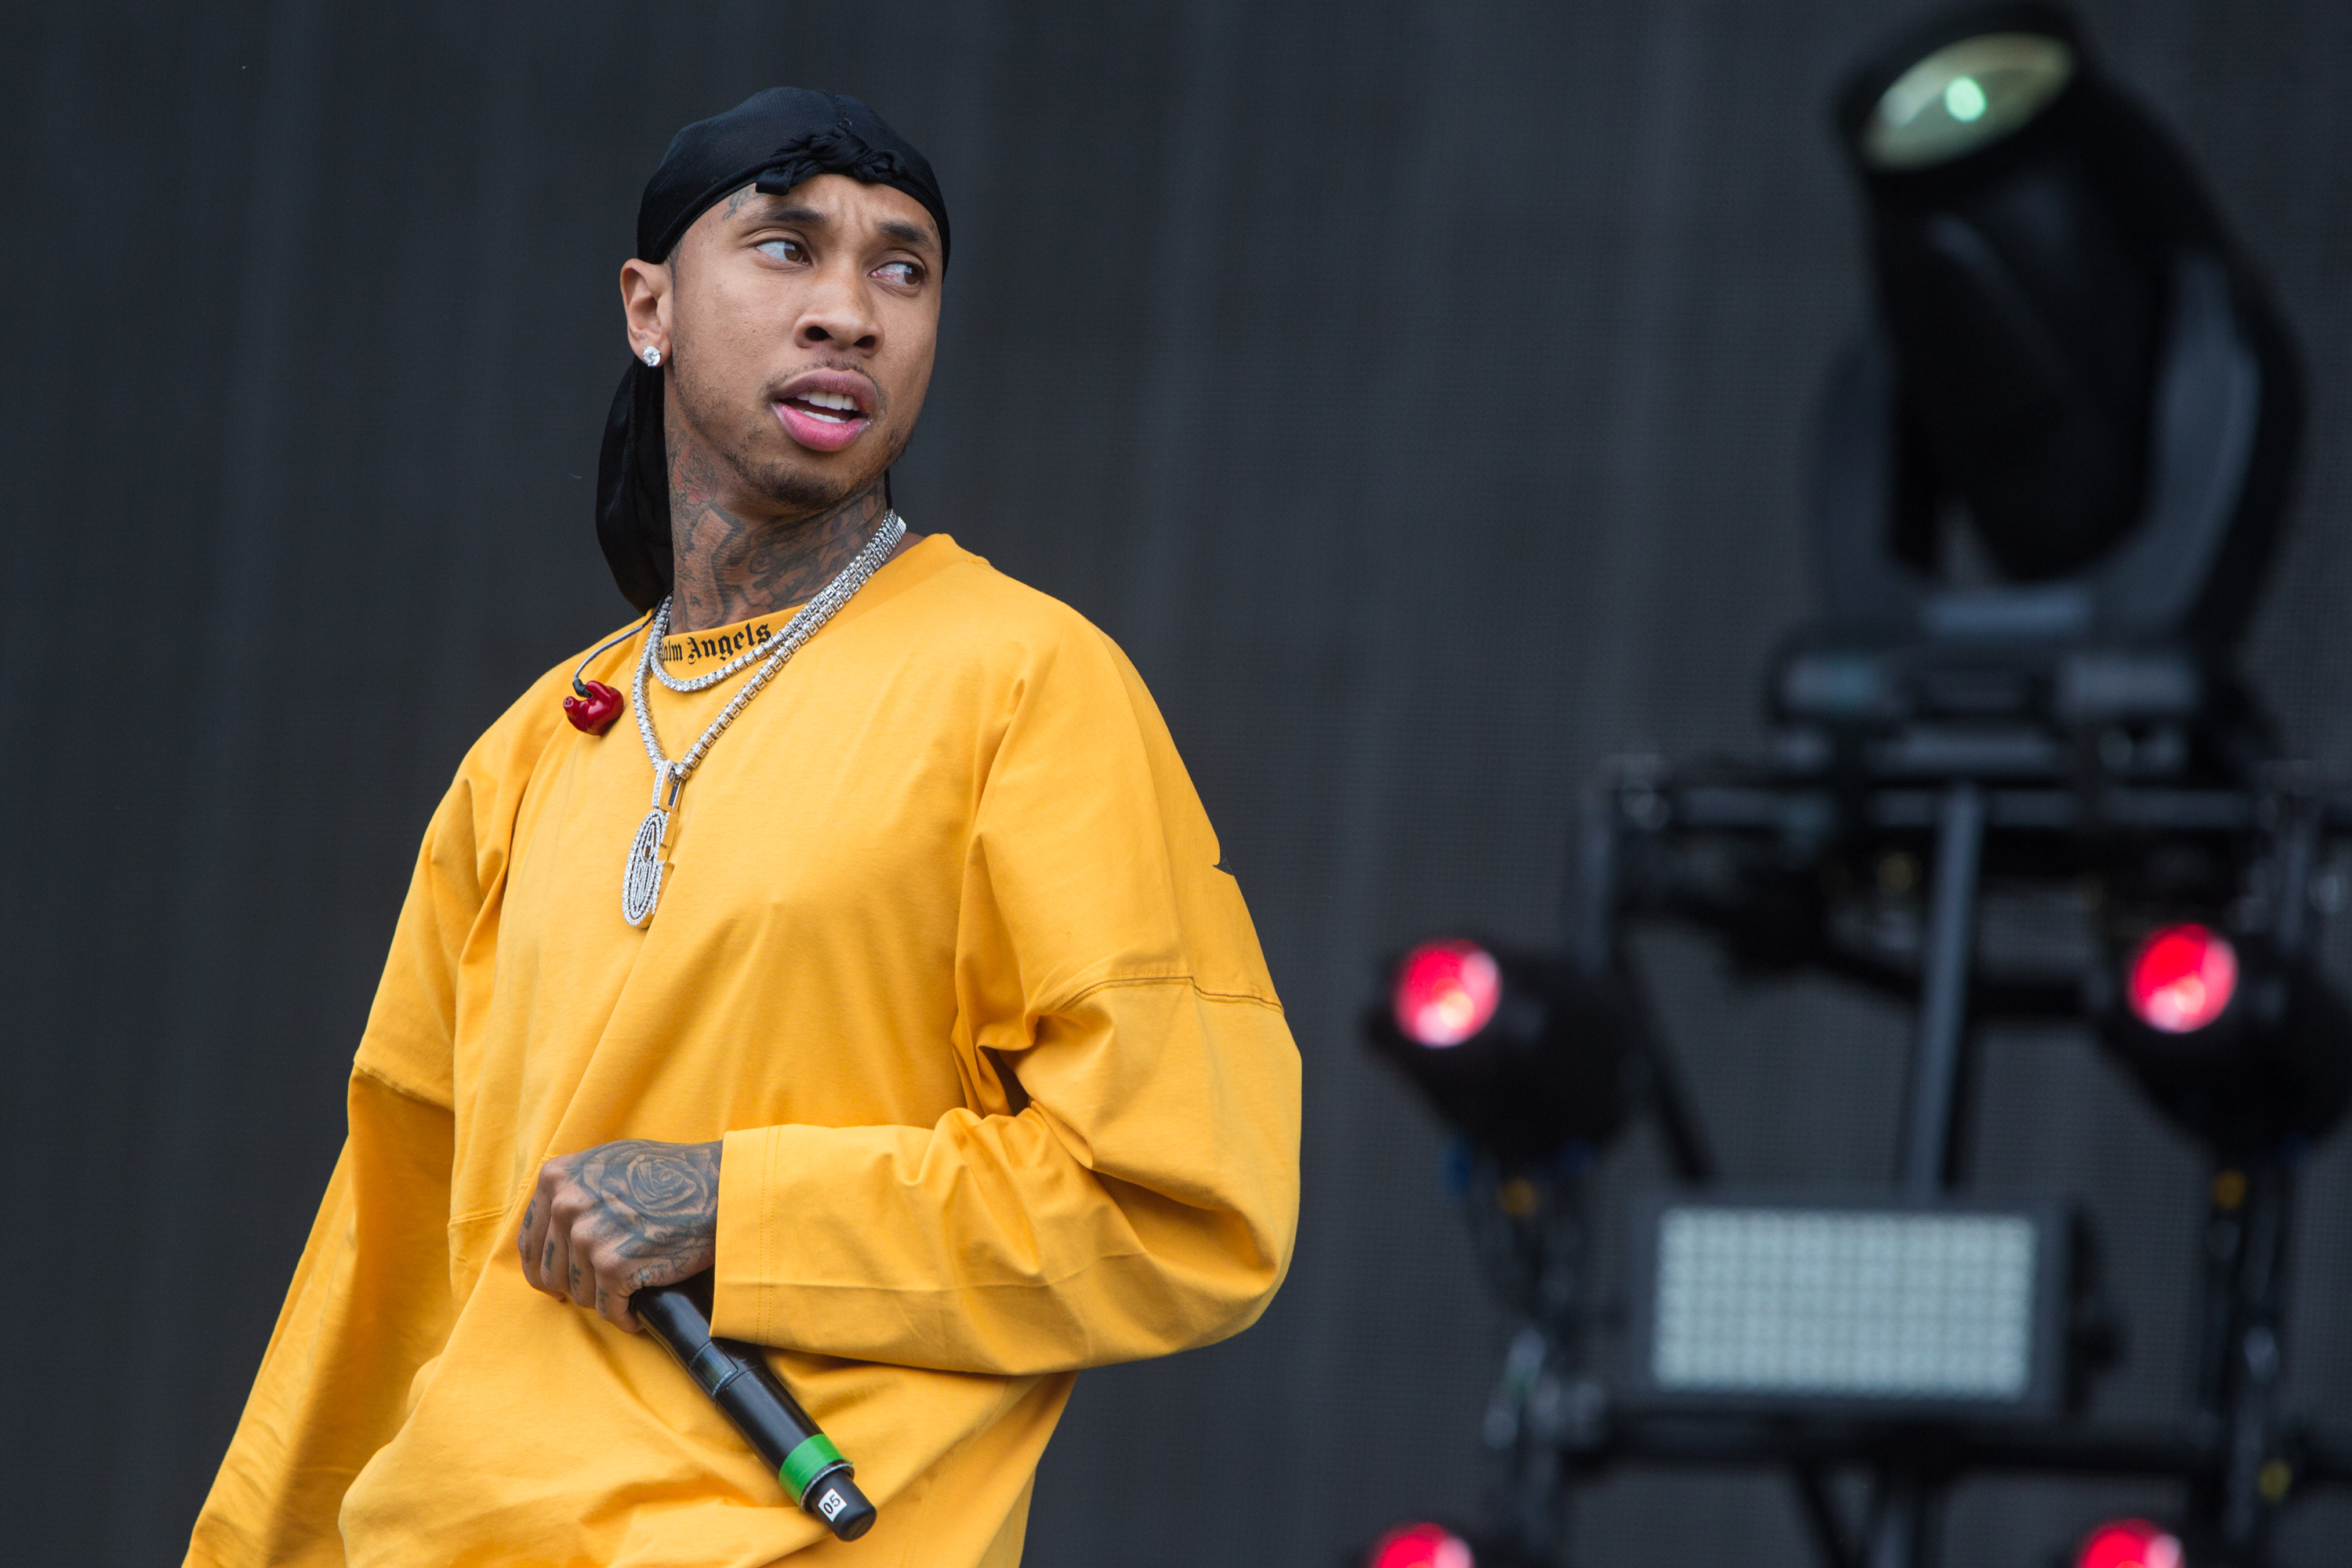 Who Is Rapper Tyga and What Is His Net Worth?